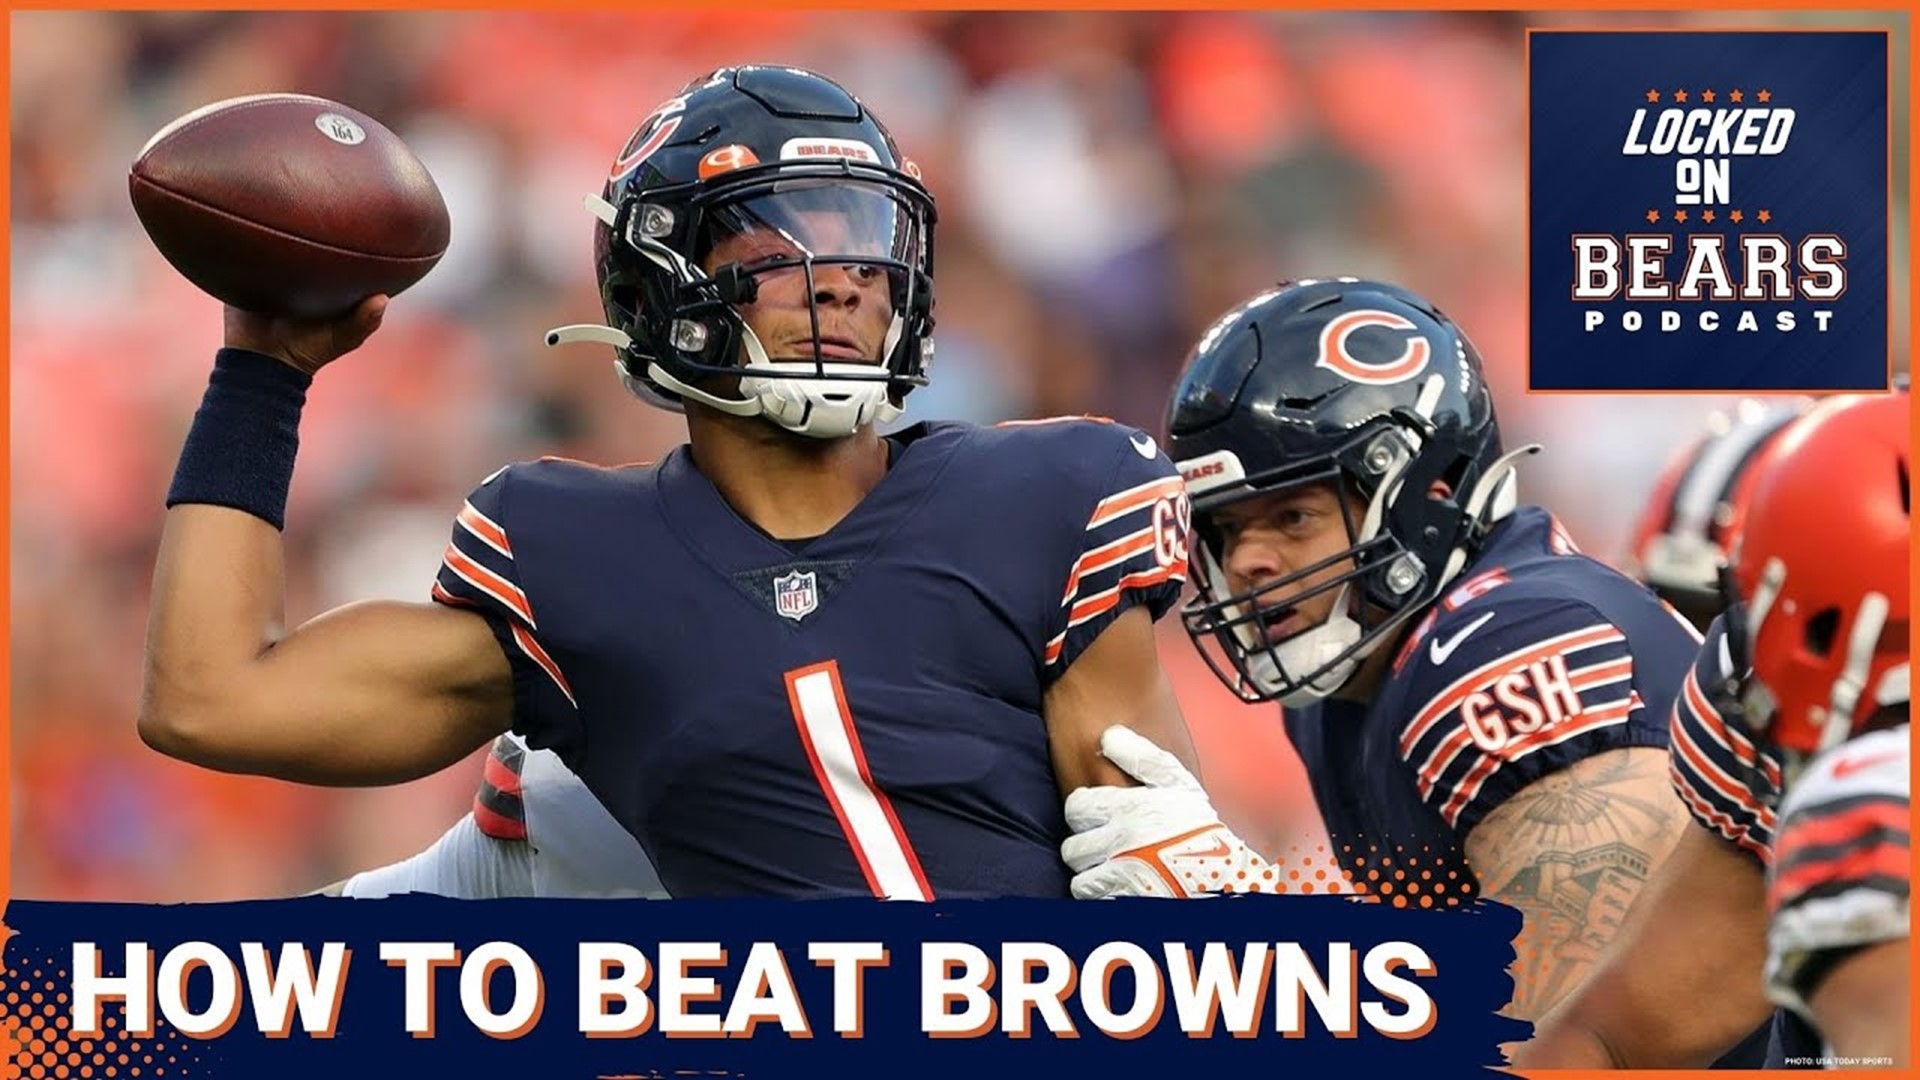 The Chicago Bears need to beat the Cleveland Browns to keep their playoff hopes alive, and the Bears will benefit from some major injuries in Cleveland.